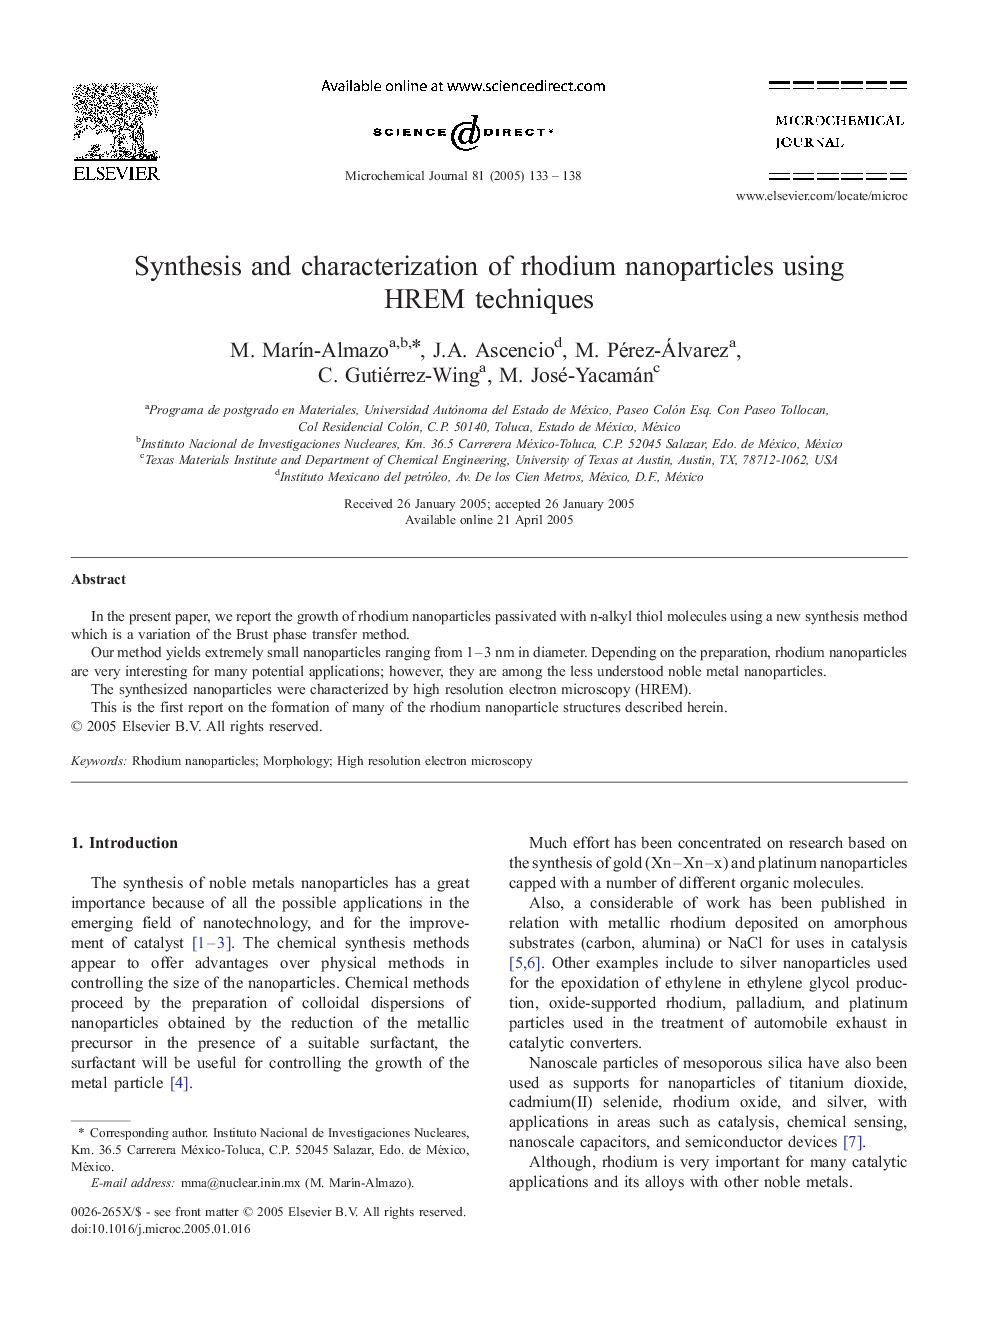 Synthesis and characterization of rhodium nanoparticles using HREM techniques